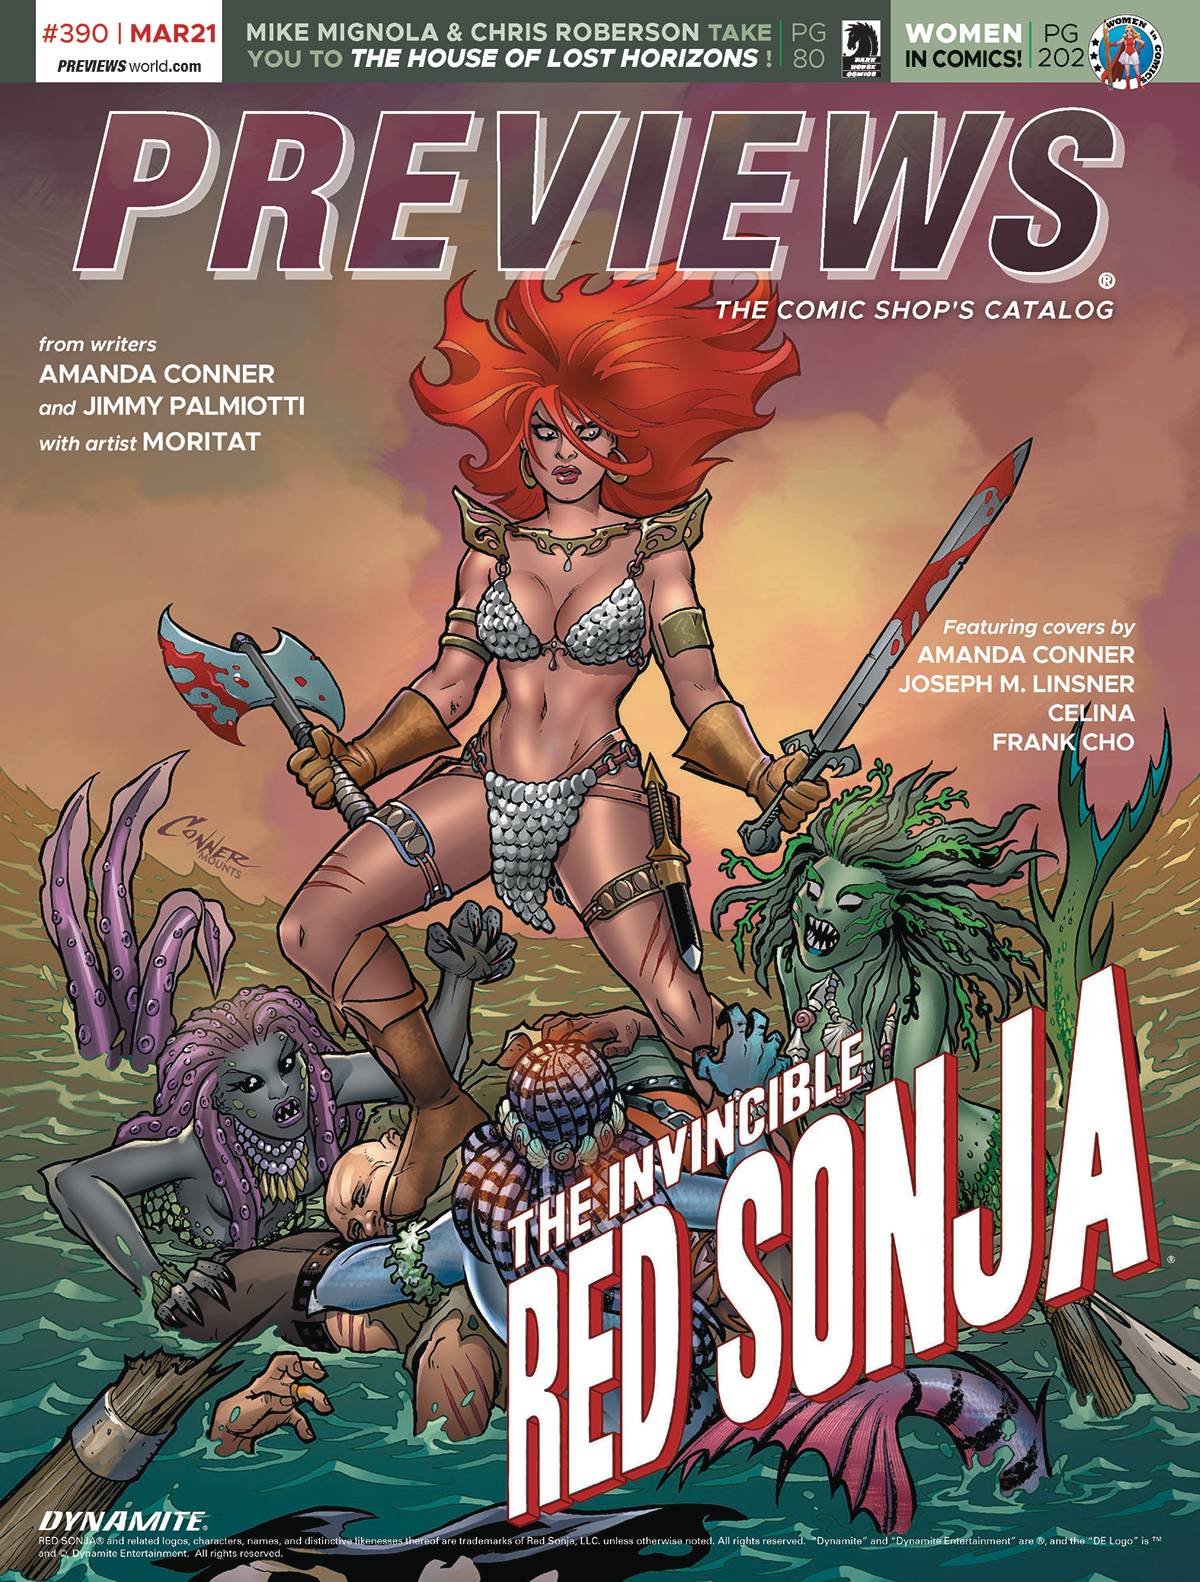 Previews #390 March 2021 #390